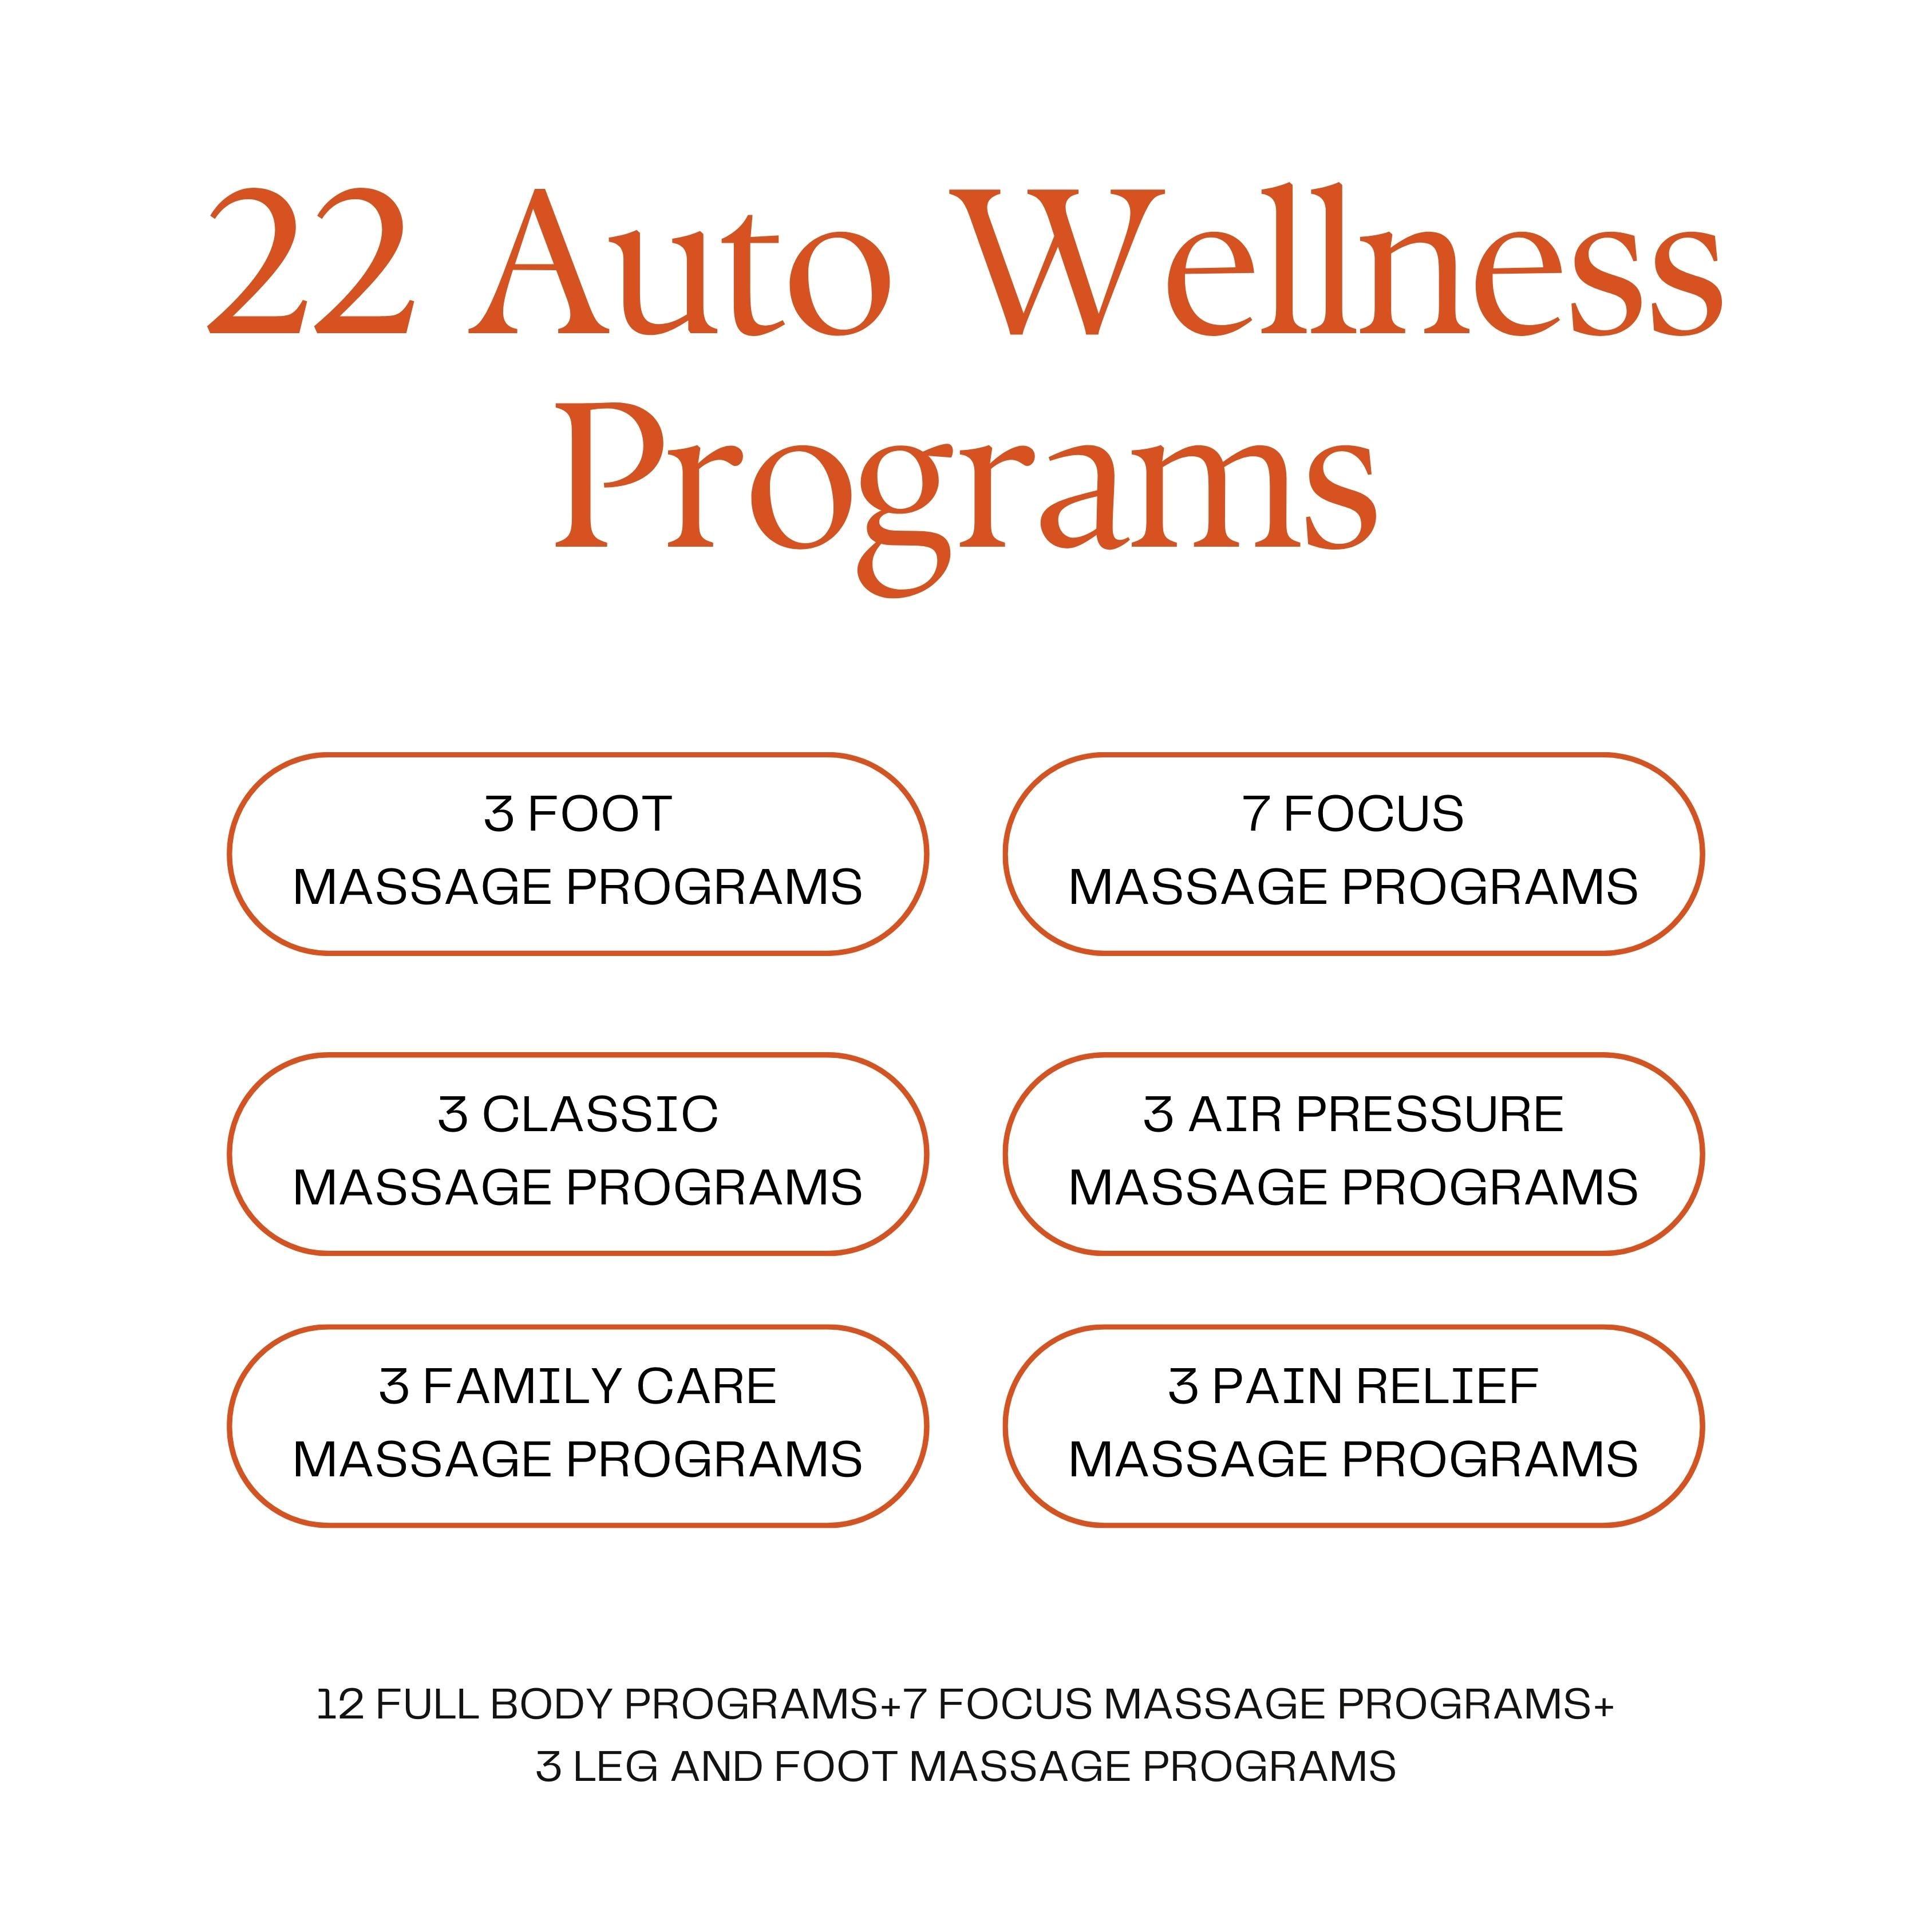 Overview of 22 auto wellness programs including foot, focus, classic, air pressure, family care, and pain relief massage options.